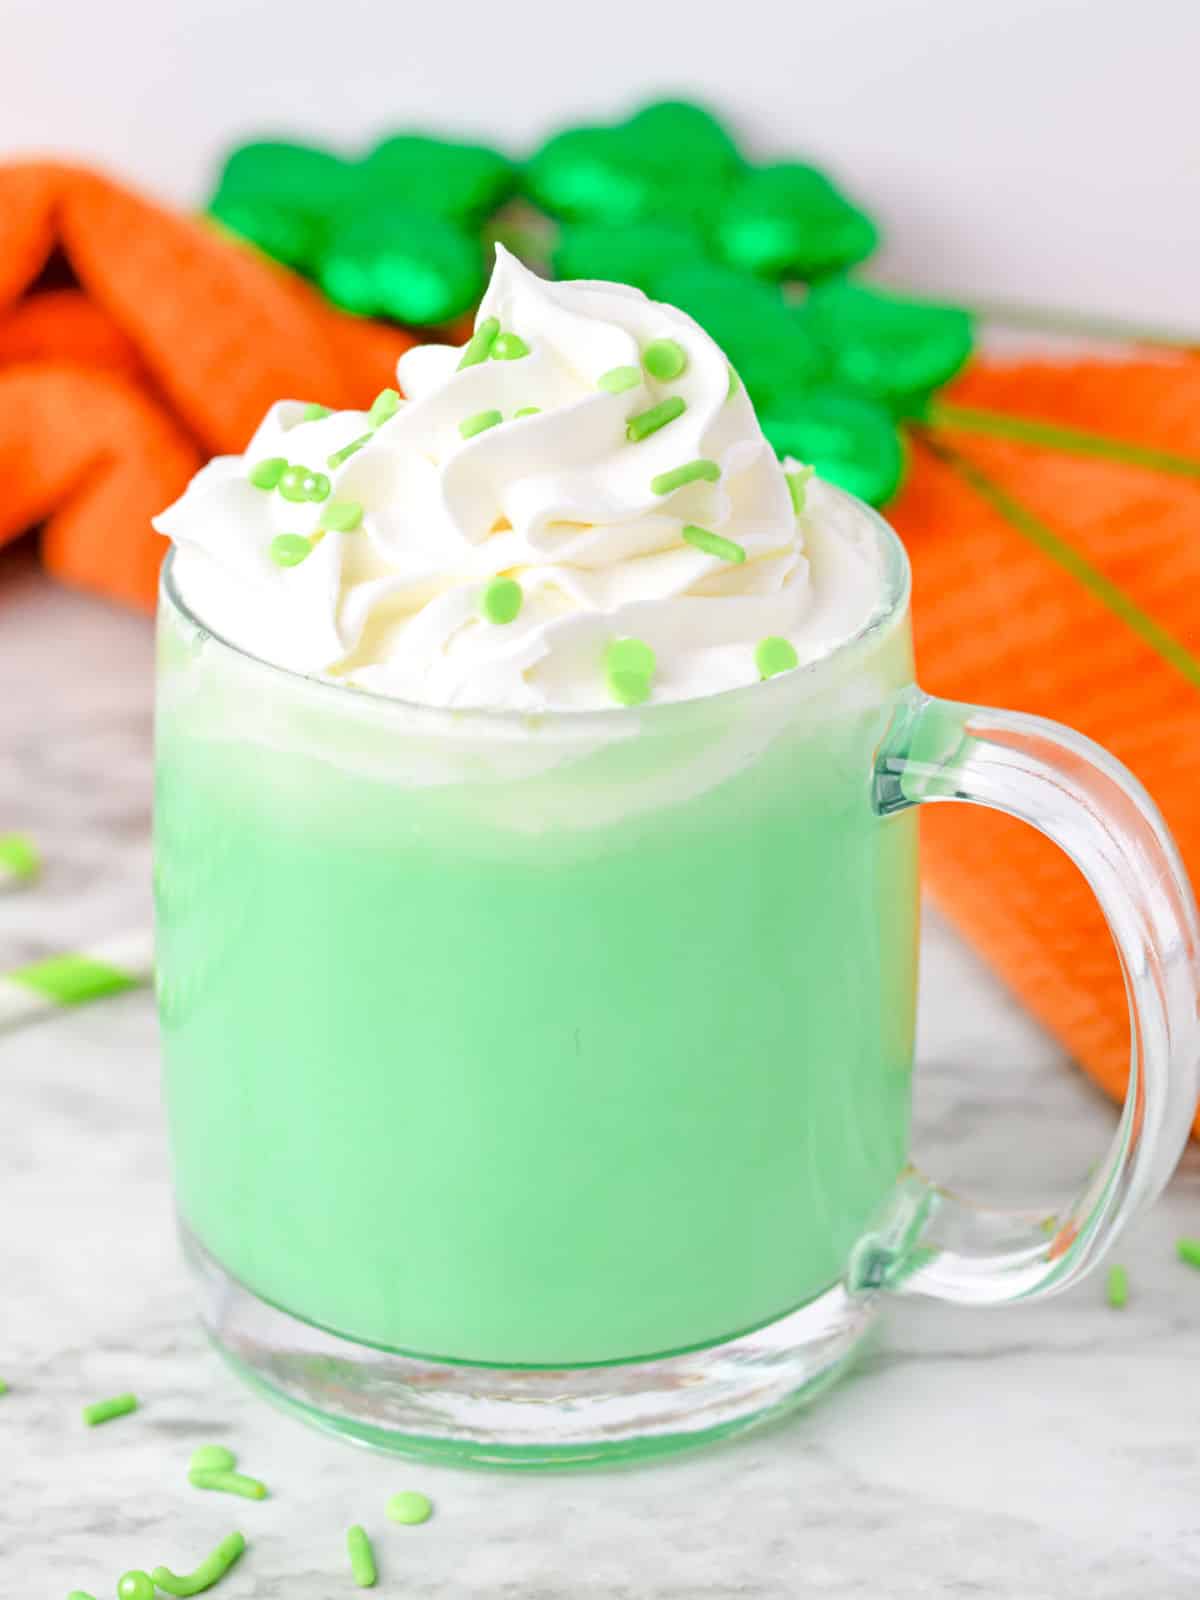 St patrick's day hot chocolate with whipped cream and green sprinkles.